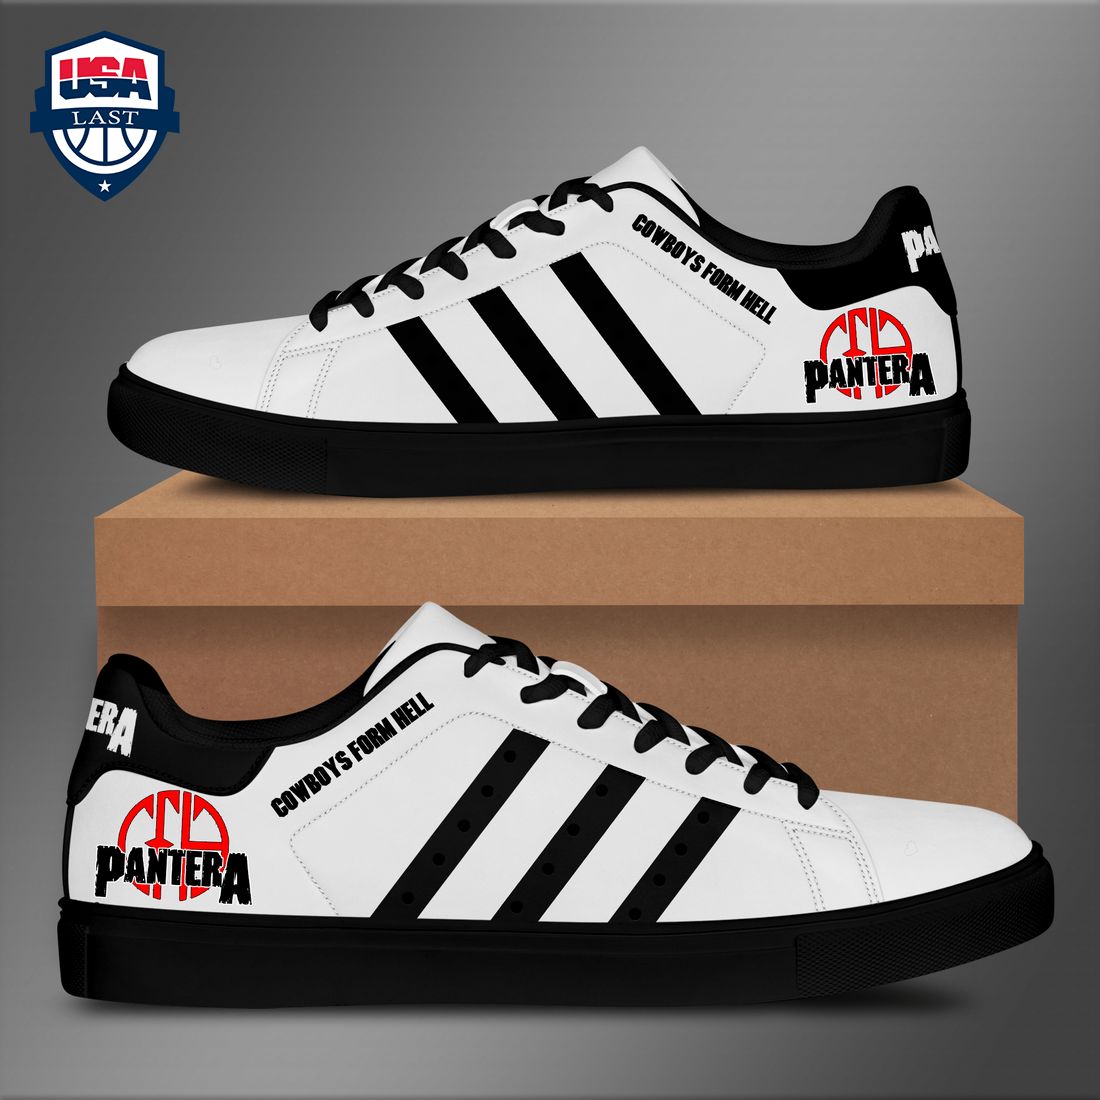 pantera-cowboys-from-hell-black-stripes-style-4-stan-smith-low-top-shoes-1-oz2pE.jpg